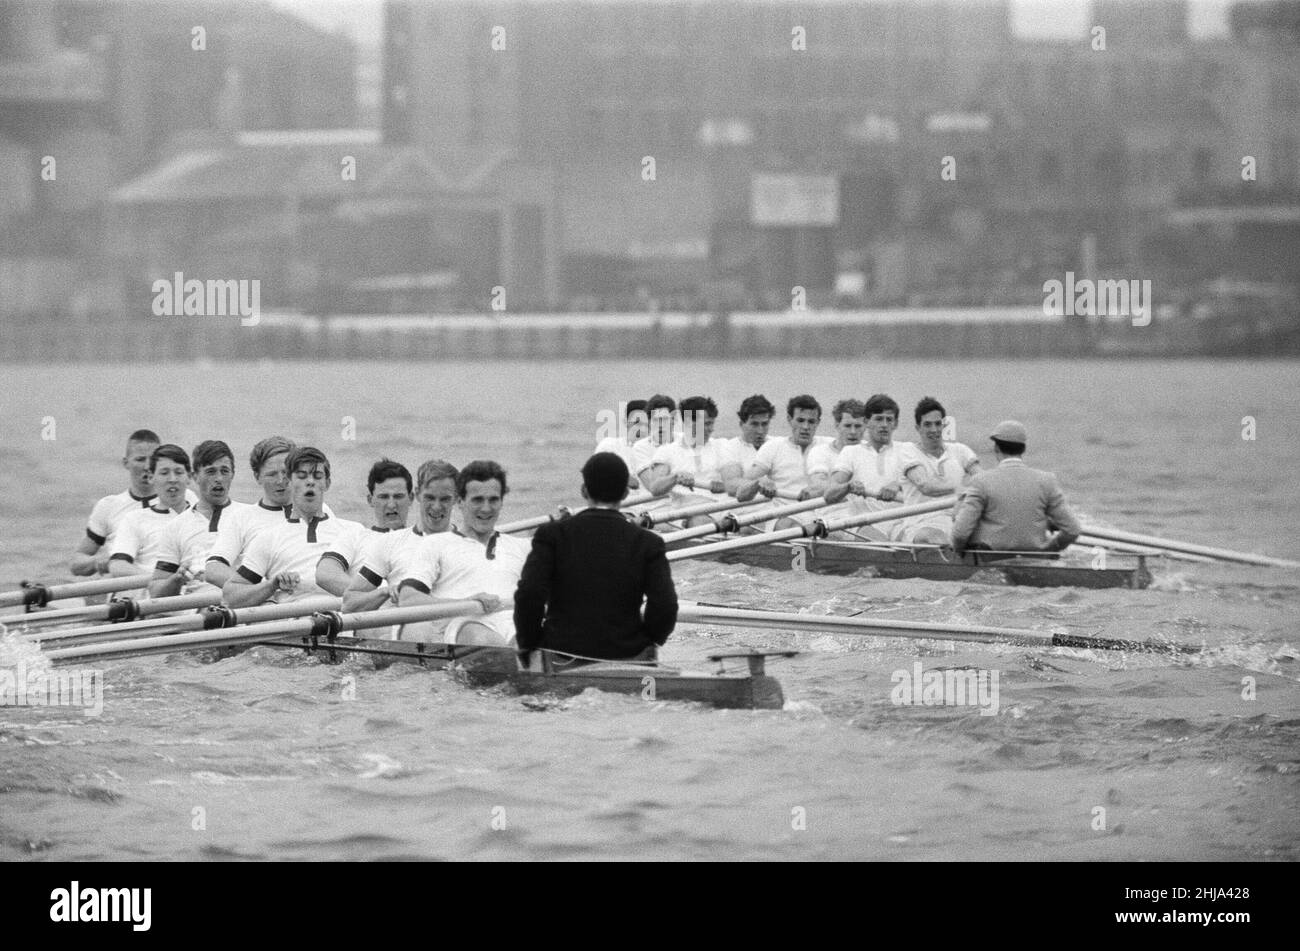 Oxford verses Cambridge Boat Race, on The River Thames, London, 23rd March 1963  The 109th Boat Race took place on 23 March 1963. Held annually, the event is a side-by-side rowing race between crews from the Universities of Oxford and Cambridge along the River Thames. The race, umpired by Gerald Ellison, the Bishop of Chester, was won by Oxford with a winning margin of five lengths.  Picture taken 23rd March 1963 Stock Photo